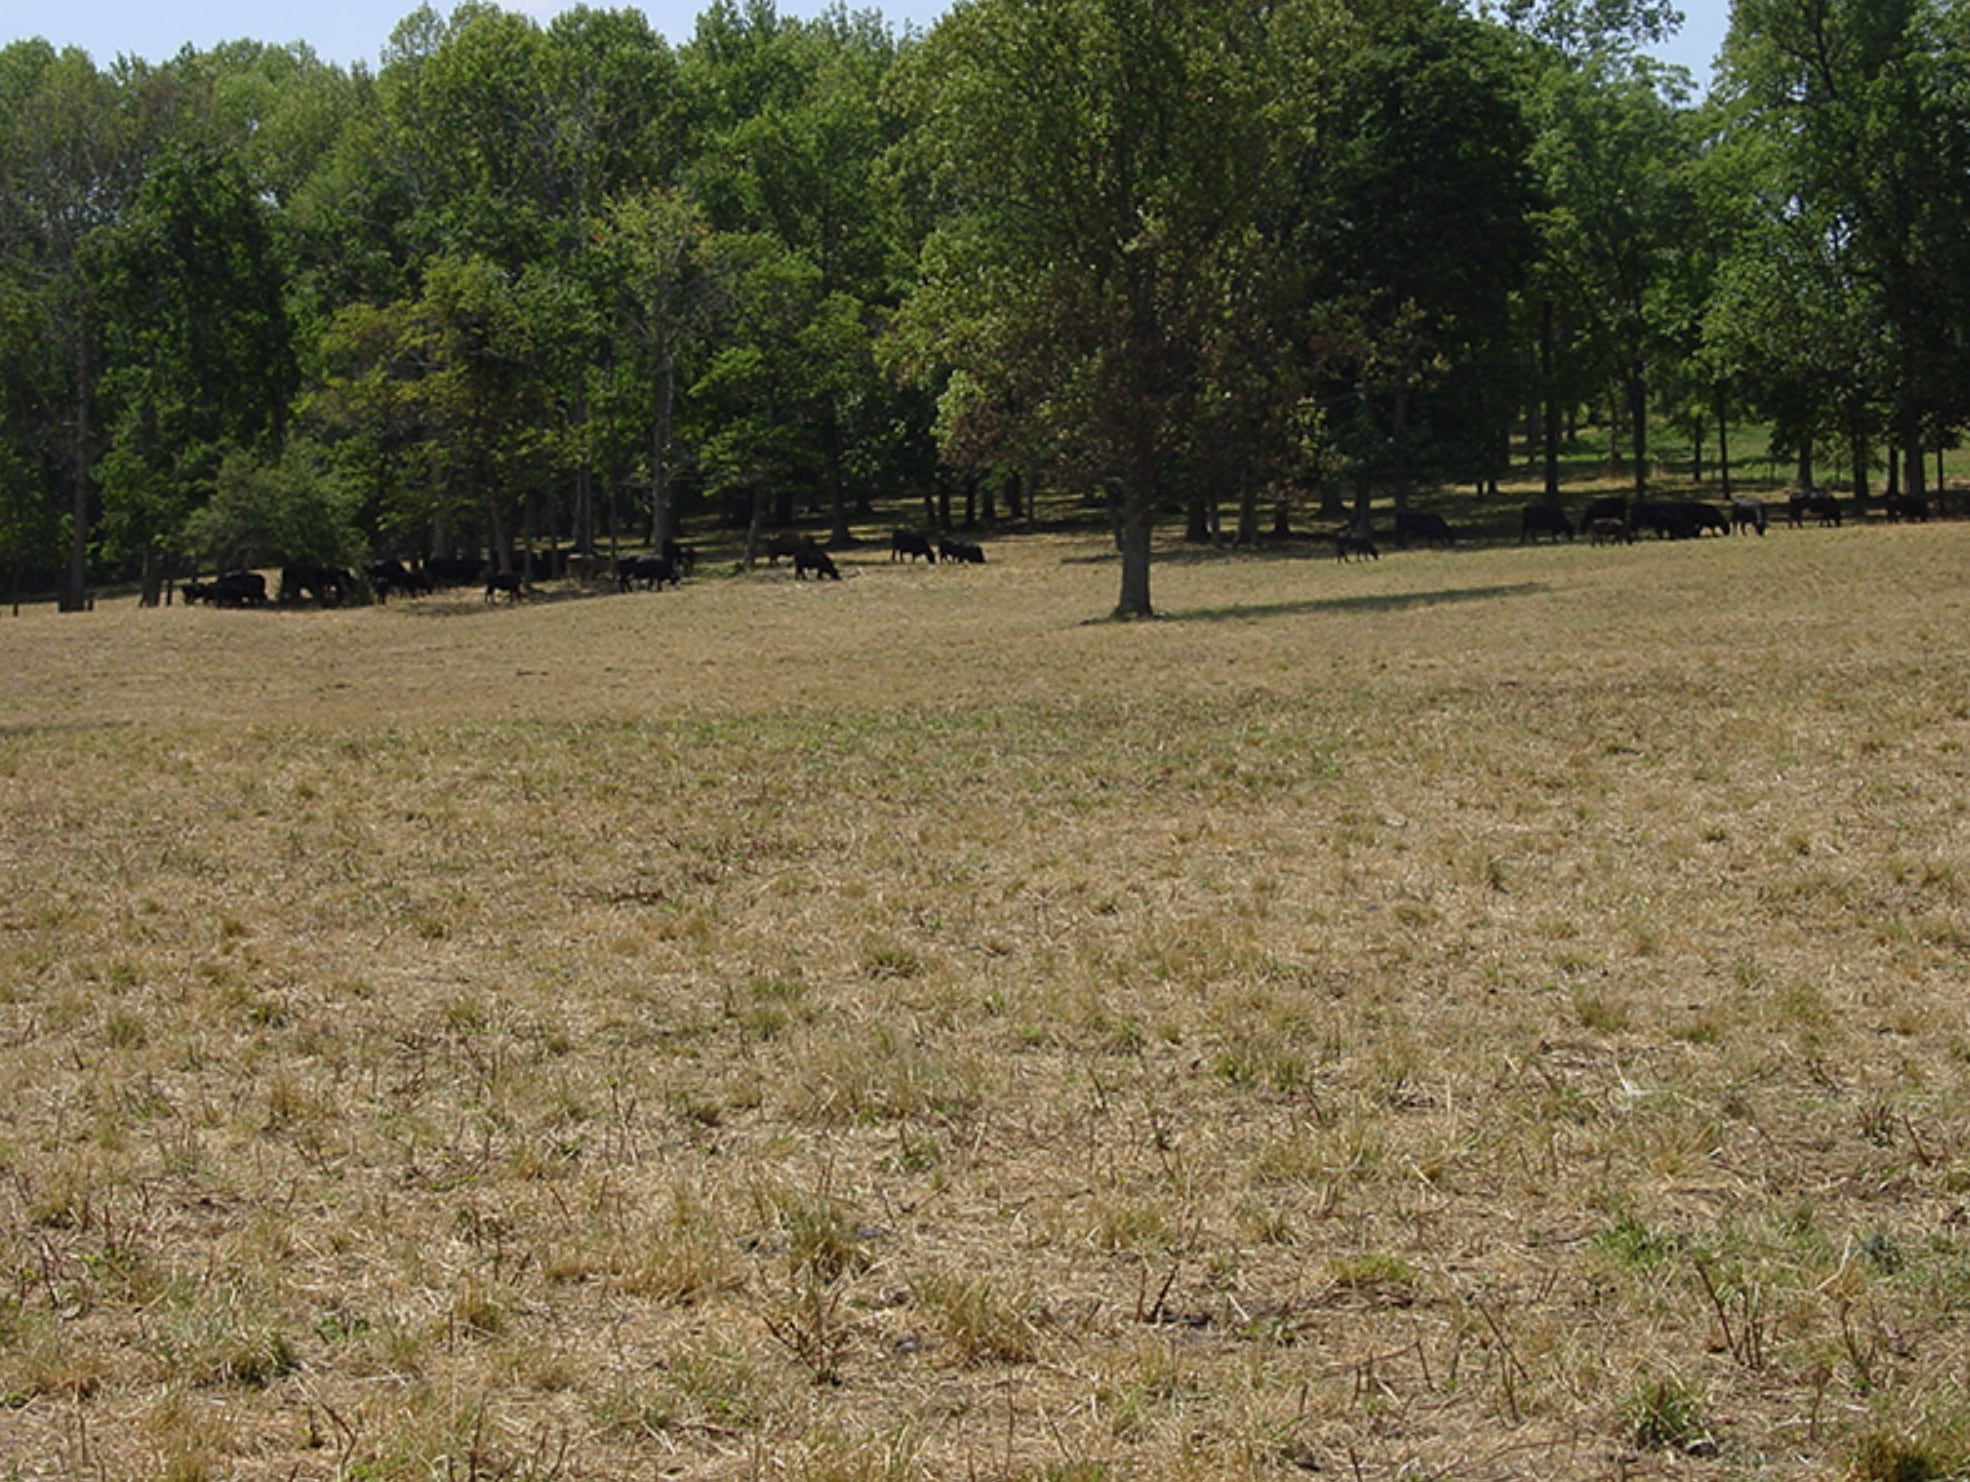 Drought may impact cattle forage